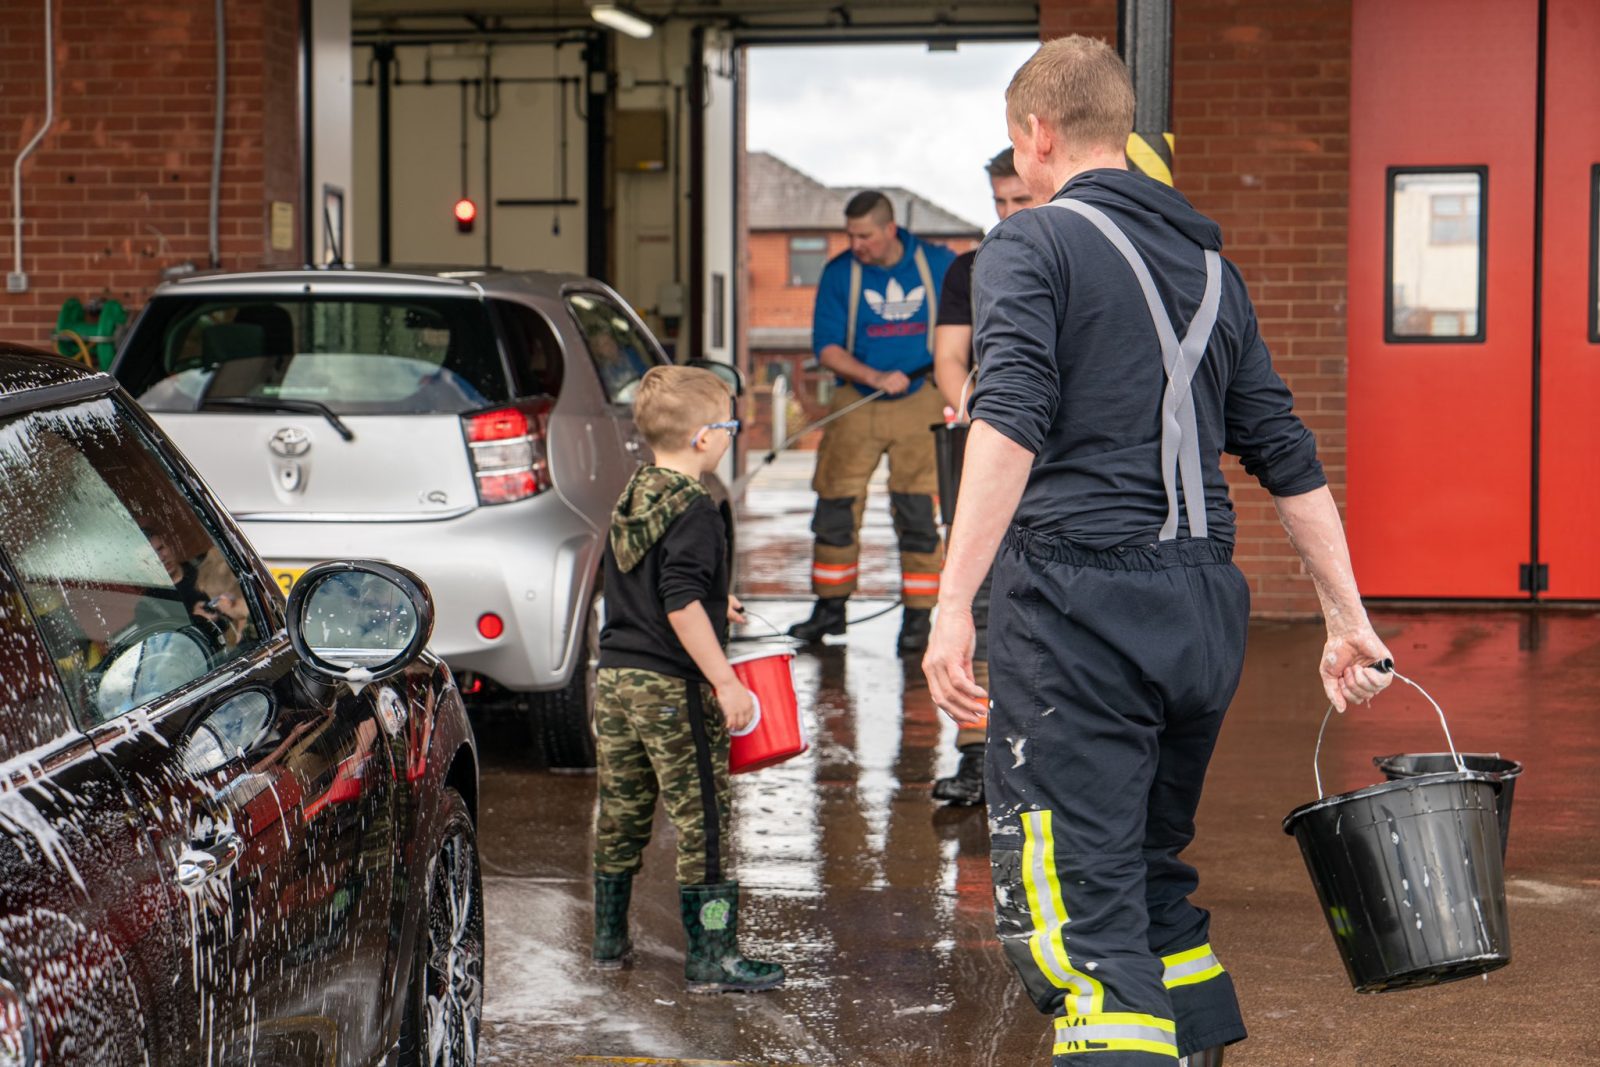 Manchester firefighters&#8217; car wash event raises over £32,000 to support the people of Ukraine, The Manc